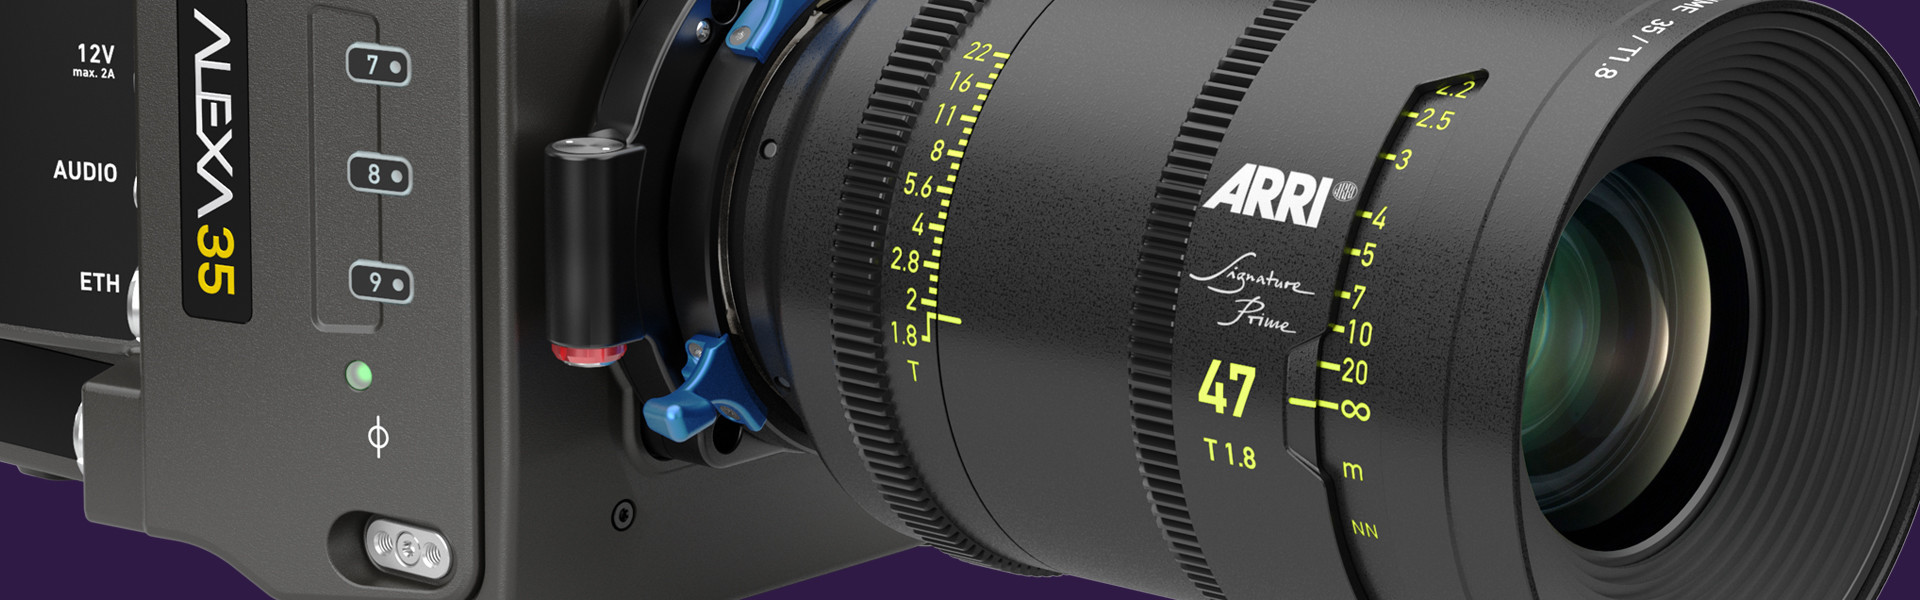 Header image for article Emerson College Selects ARRI ALEXA 35 Cameras for Their Visual & Media Arts Program